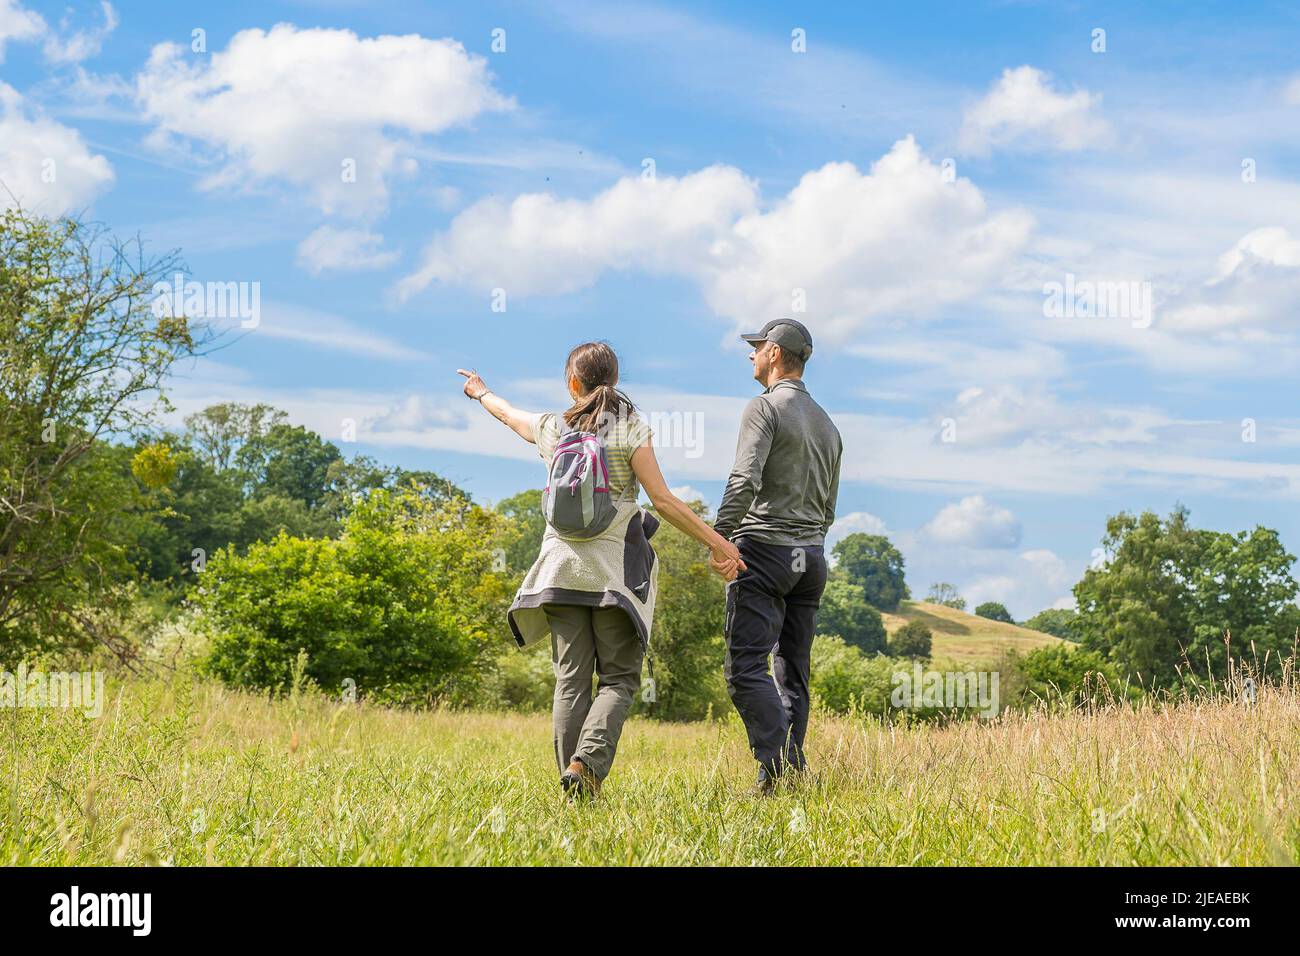 Kidderminster, UK. 26th June, 2022. UK weather: sunny weather and warm temperatures entice walkers for a stroll in the countryside. A couple holding hands walk through a country meadow enjoying the nature around them, with blue skies above. Credit: Lee Hudson/Alamy Live News Stock Photo